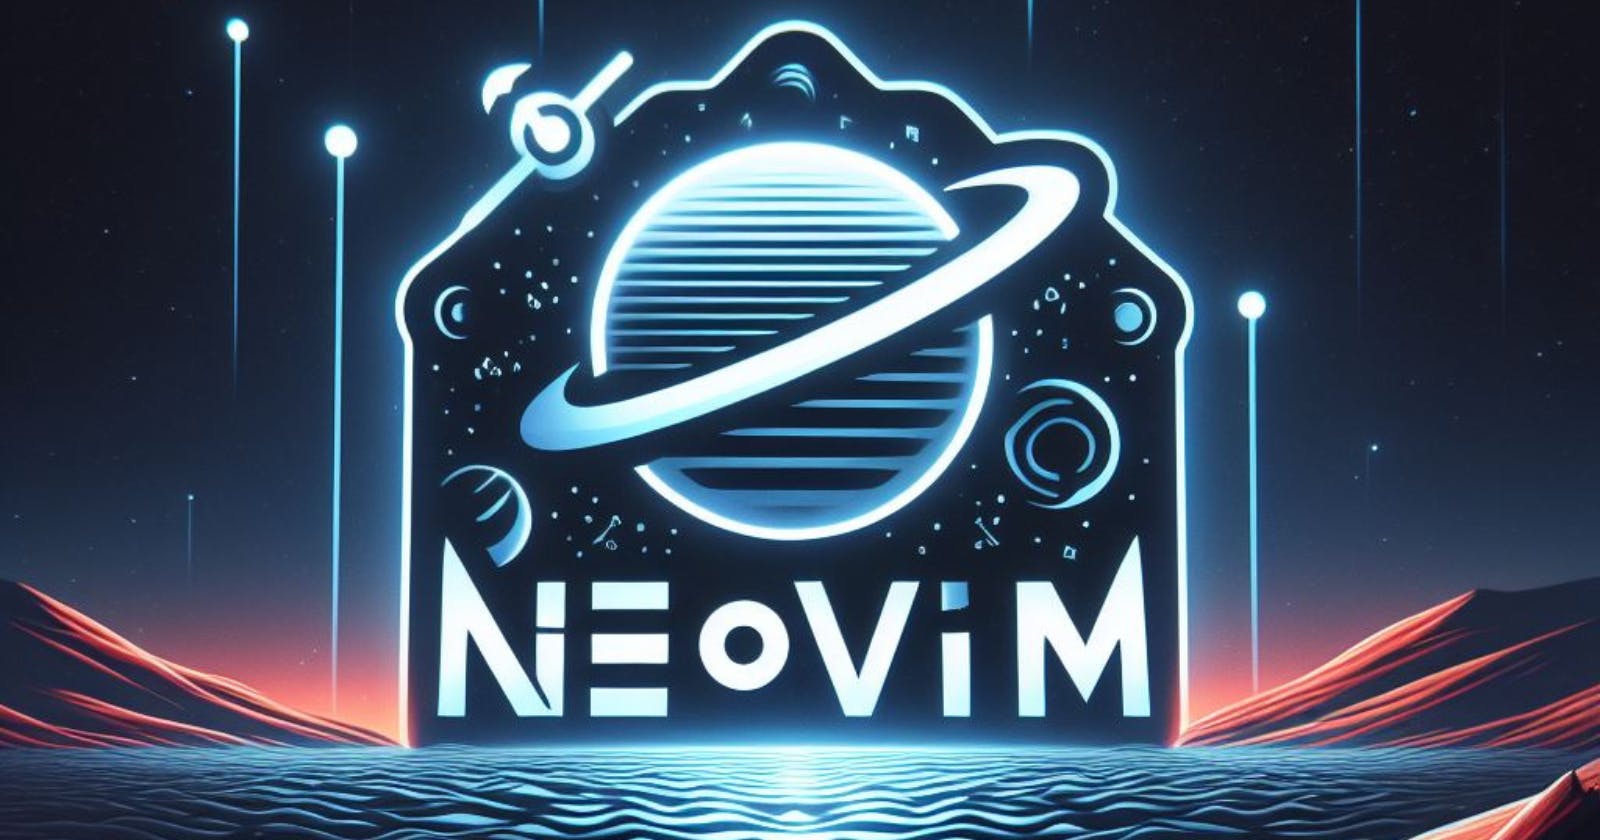 How to Use Multiple Neovim Distributions on macOS